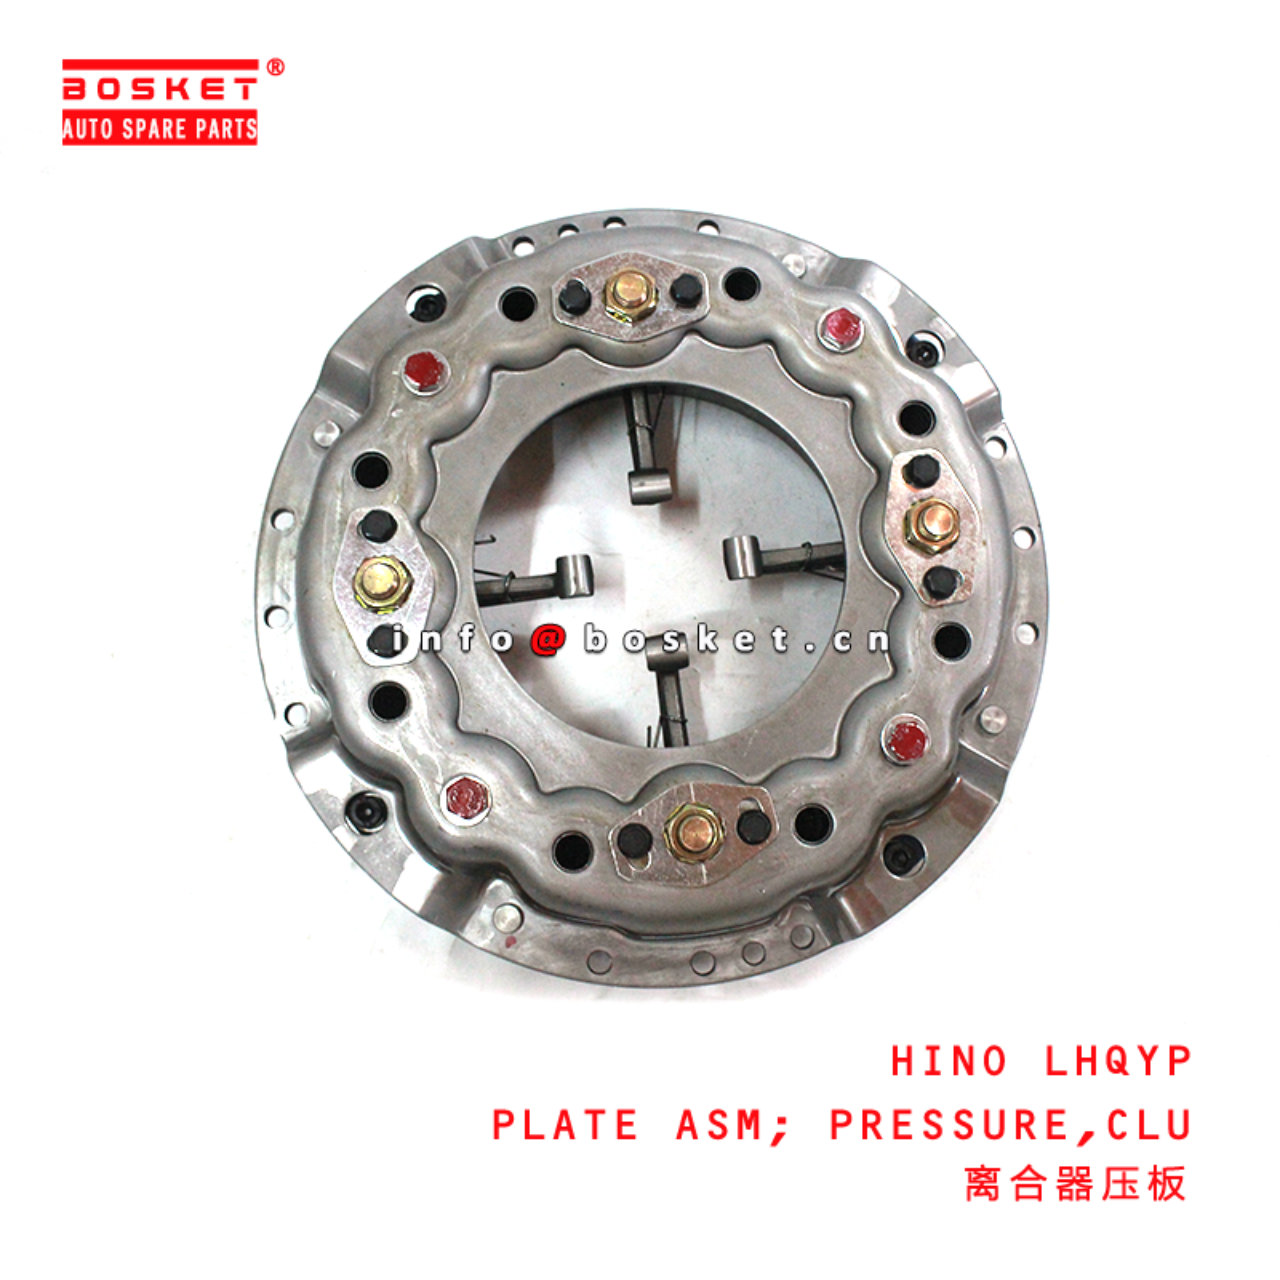 HINO LHQYP Clutch Pressure Plate Assembly Suitable for ISUZU HINO